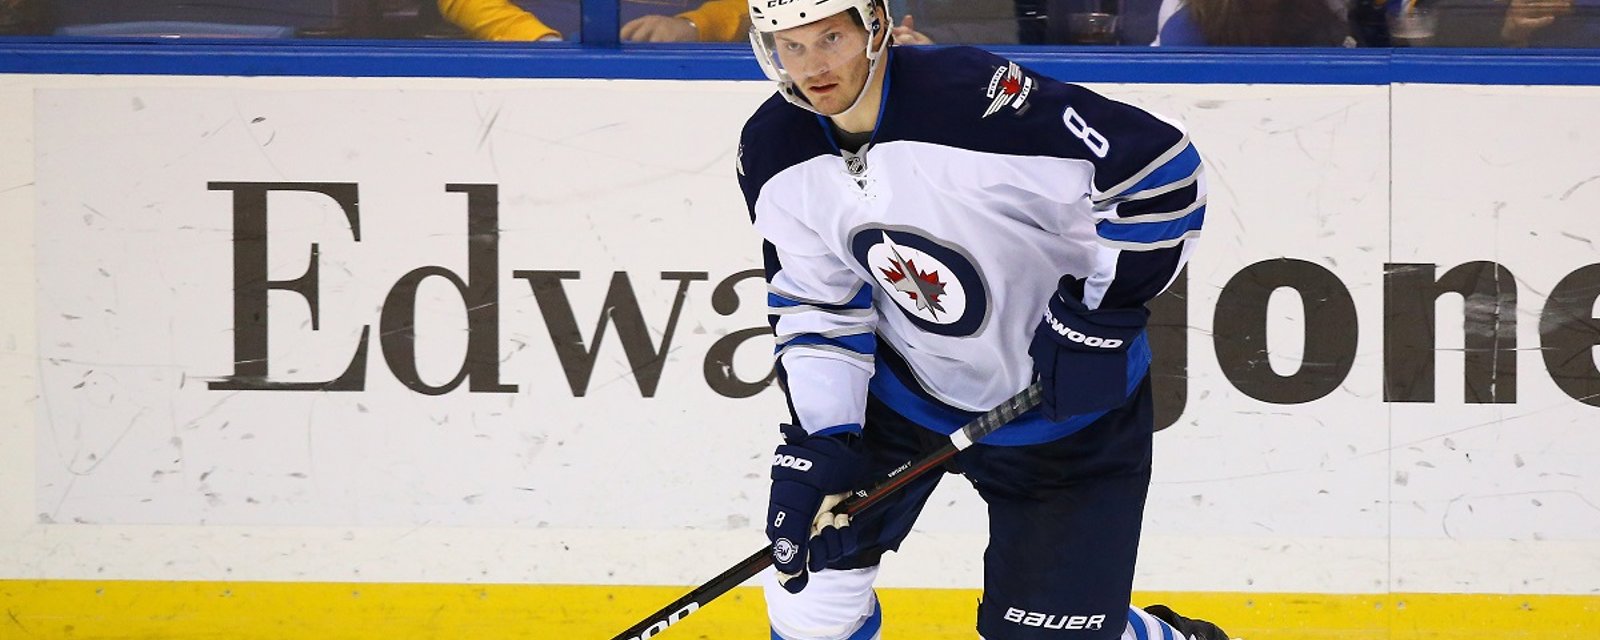 First real signs of a potential trade involving Jacob Trouba.